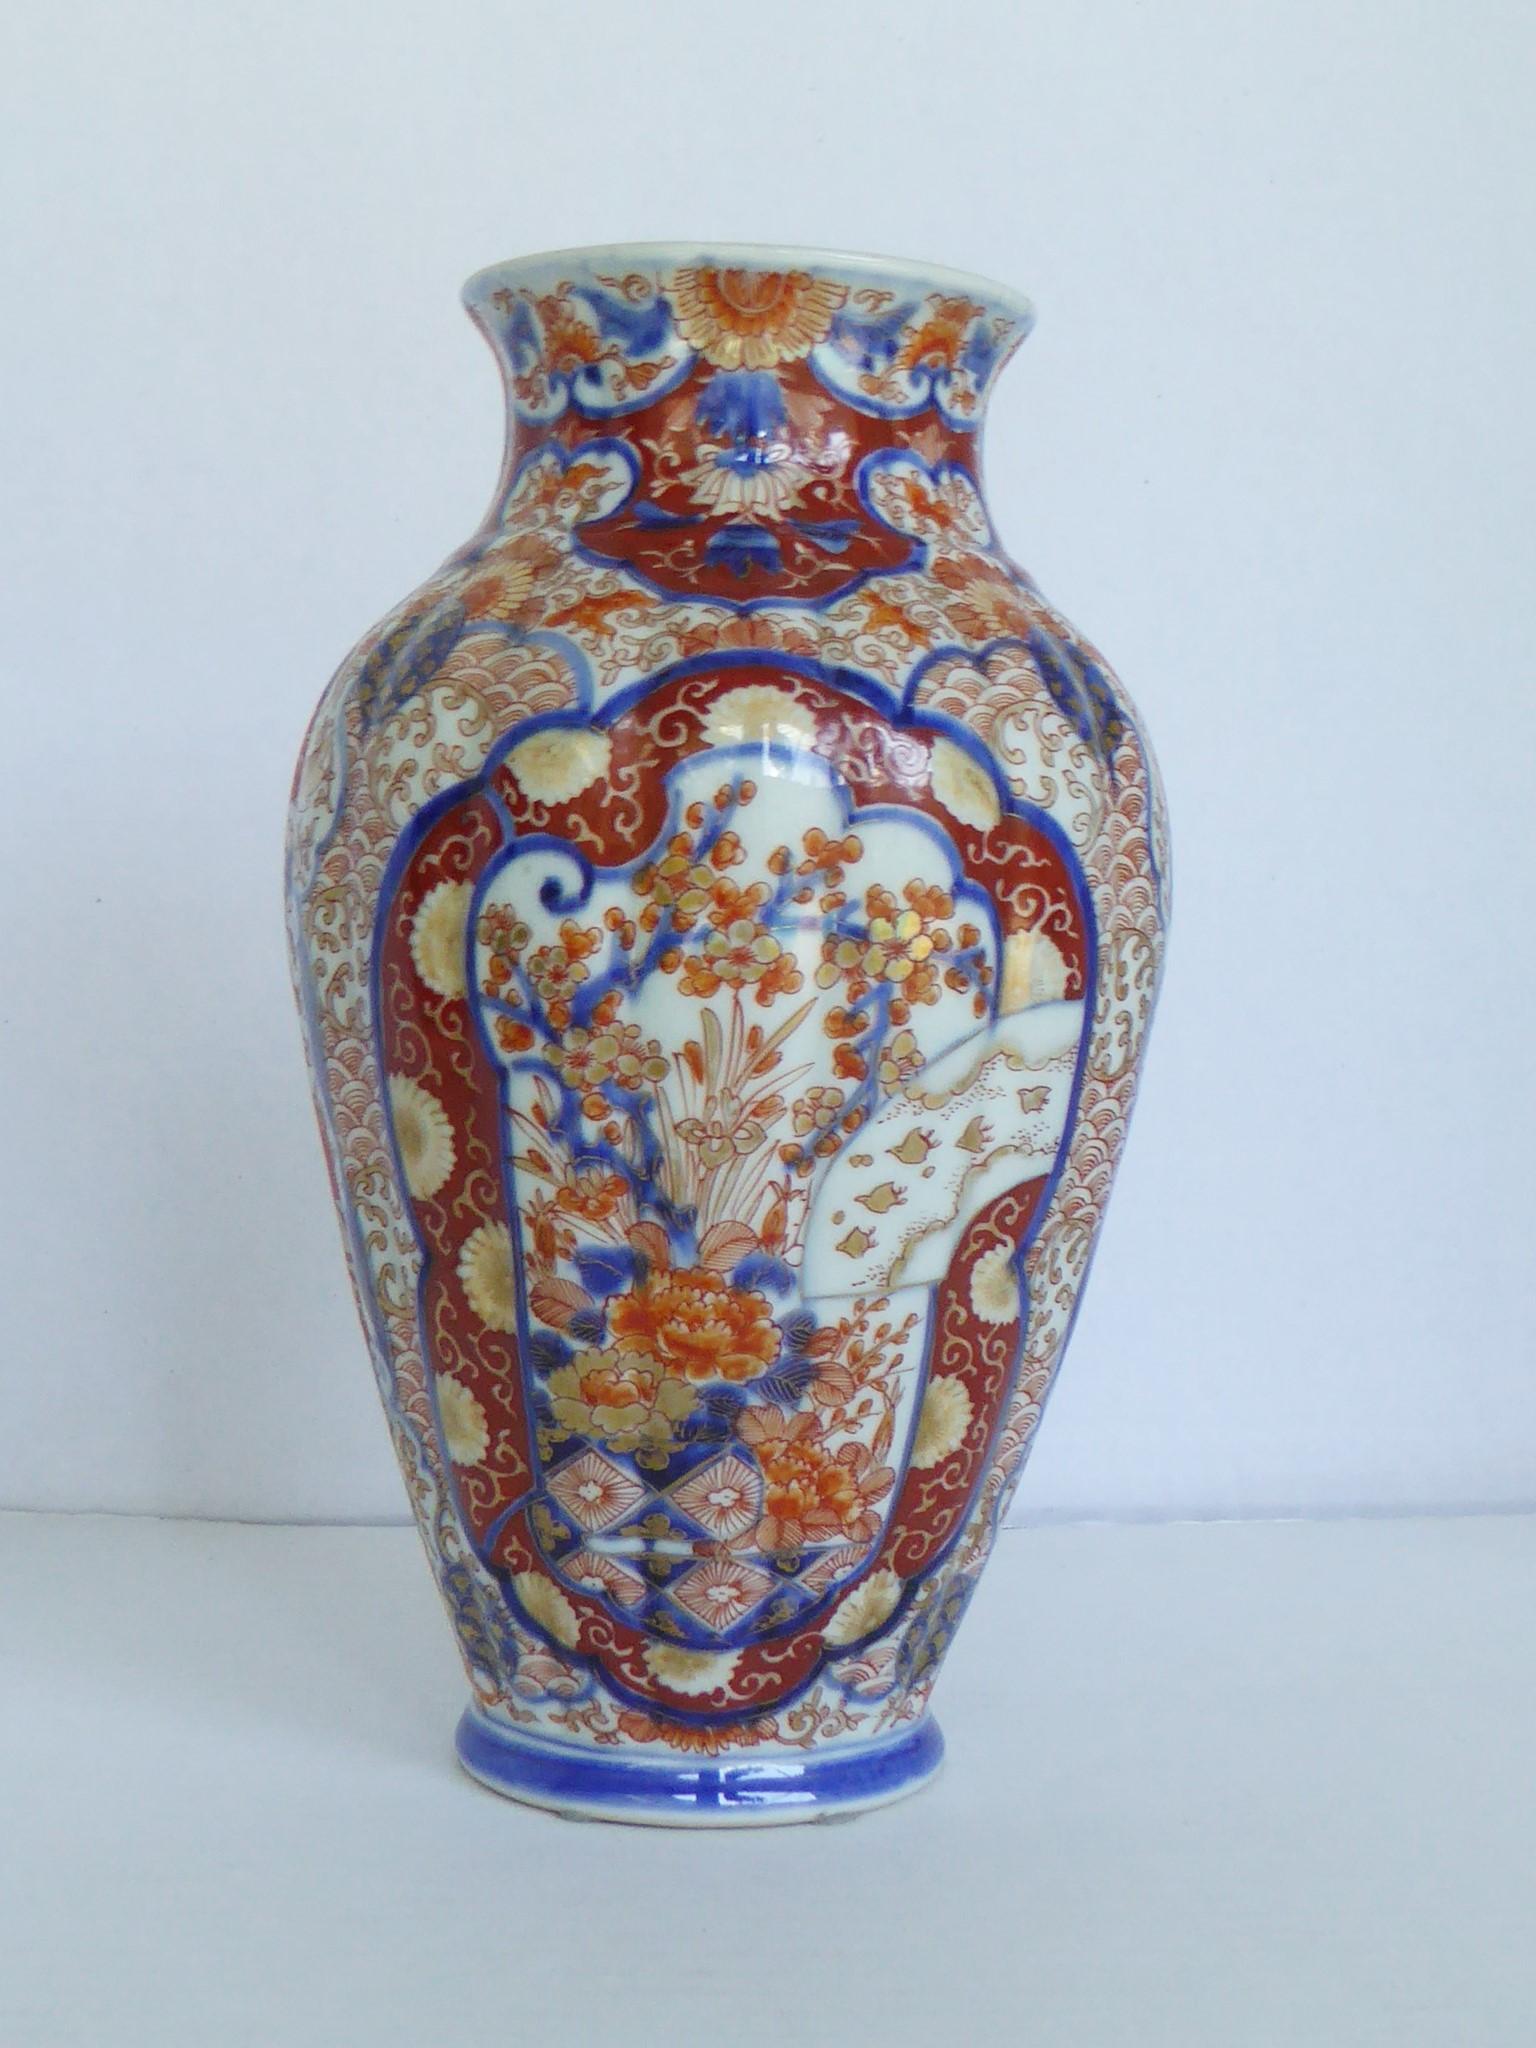 Lovely Japanese Edo Period (1603-1867) Imari Porcelain Vase in a European form. Created with a vertical scalloped surface, hand painted and hand thrown . Decorated with a medallion in front and one in the back with depiction of many symbols that